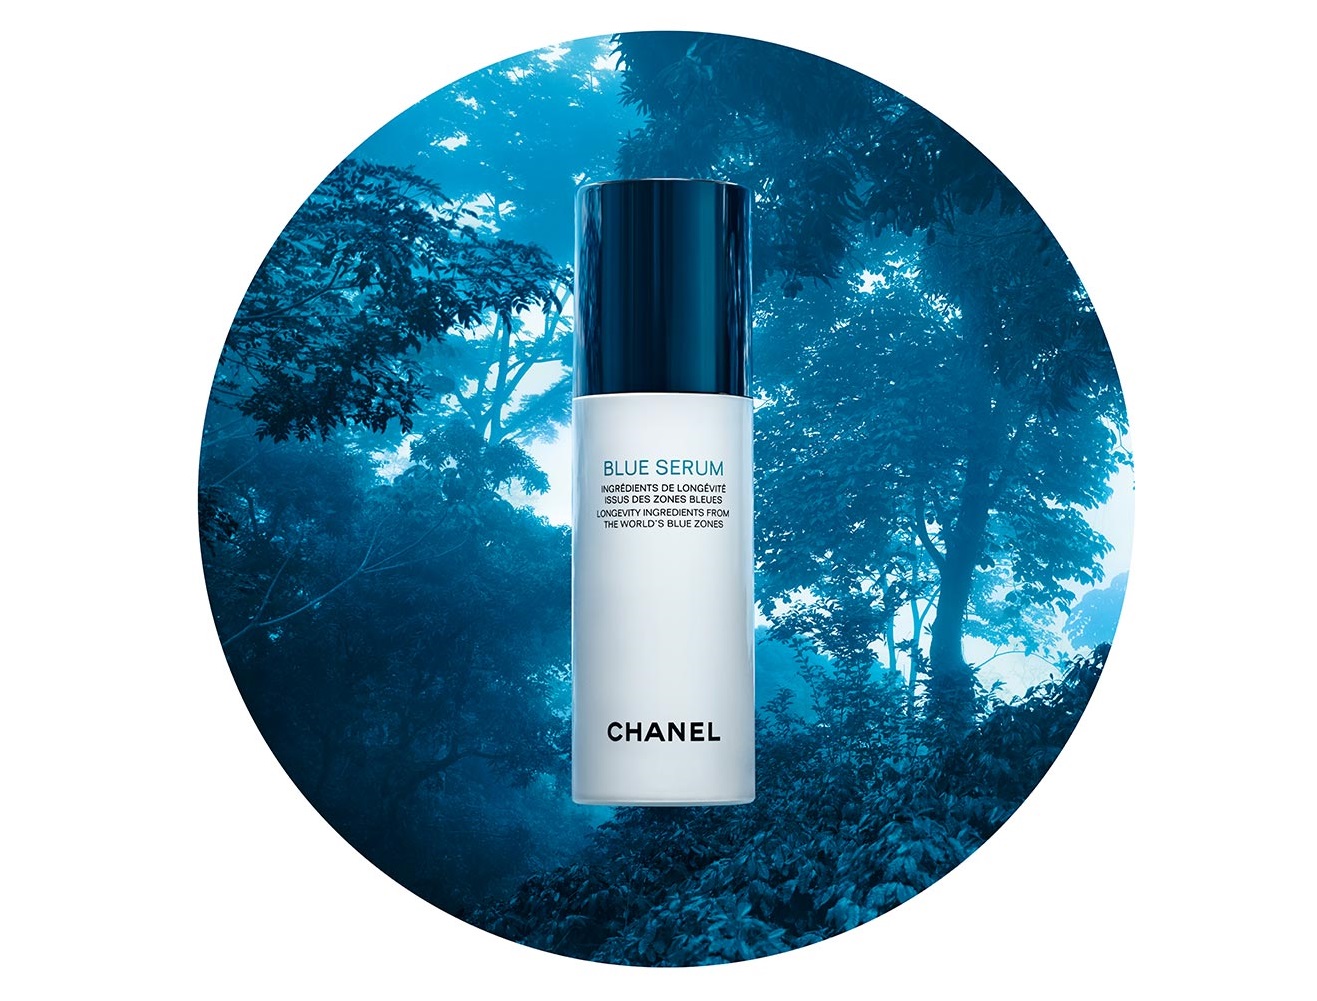 Chanel takes a holistic approach to beauty and taps a reservoir of  longevity in the brand new Chanel Blue Serum - My Women Stuff